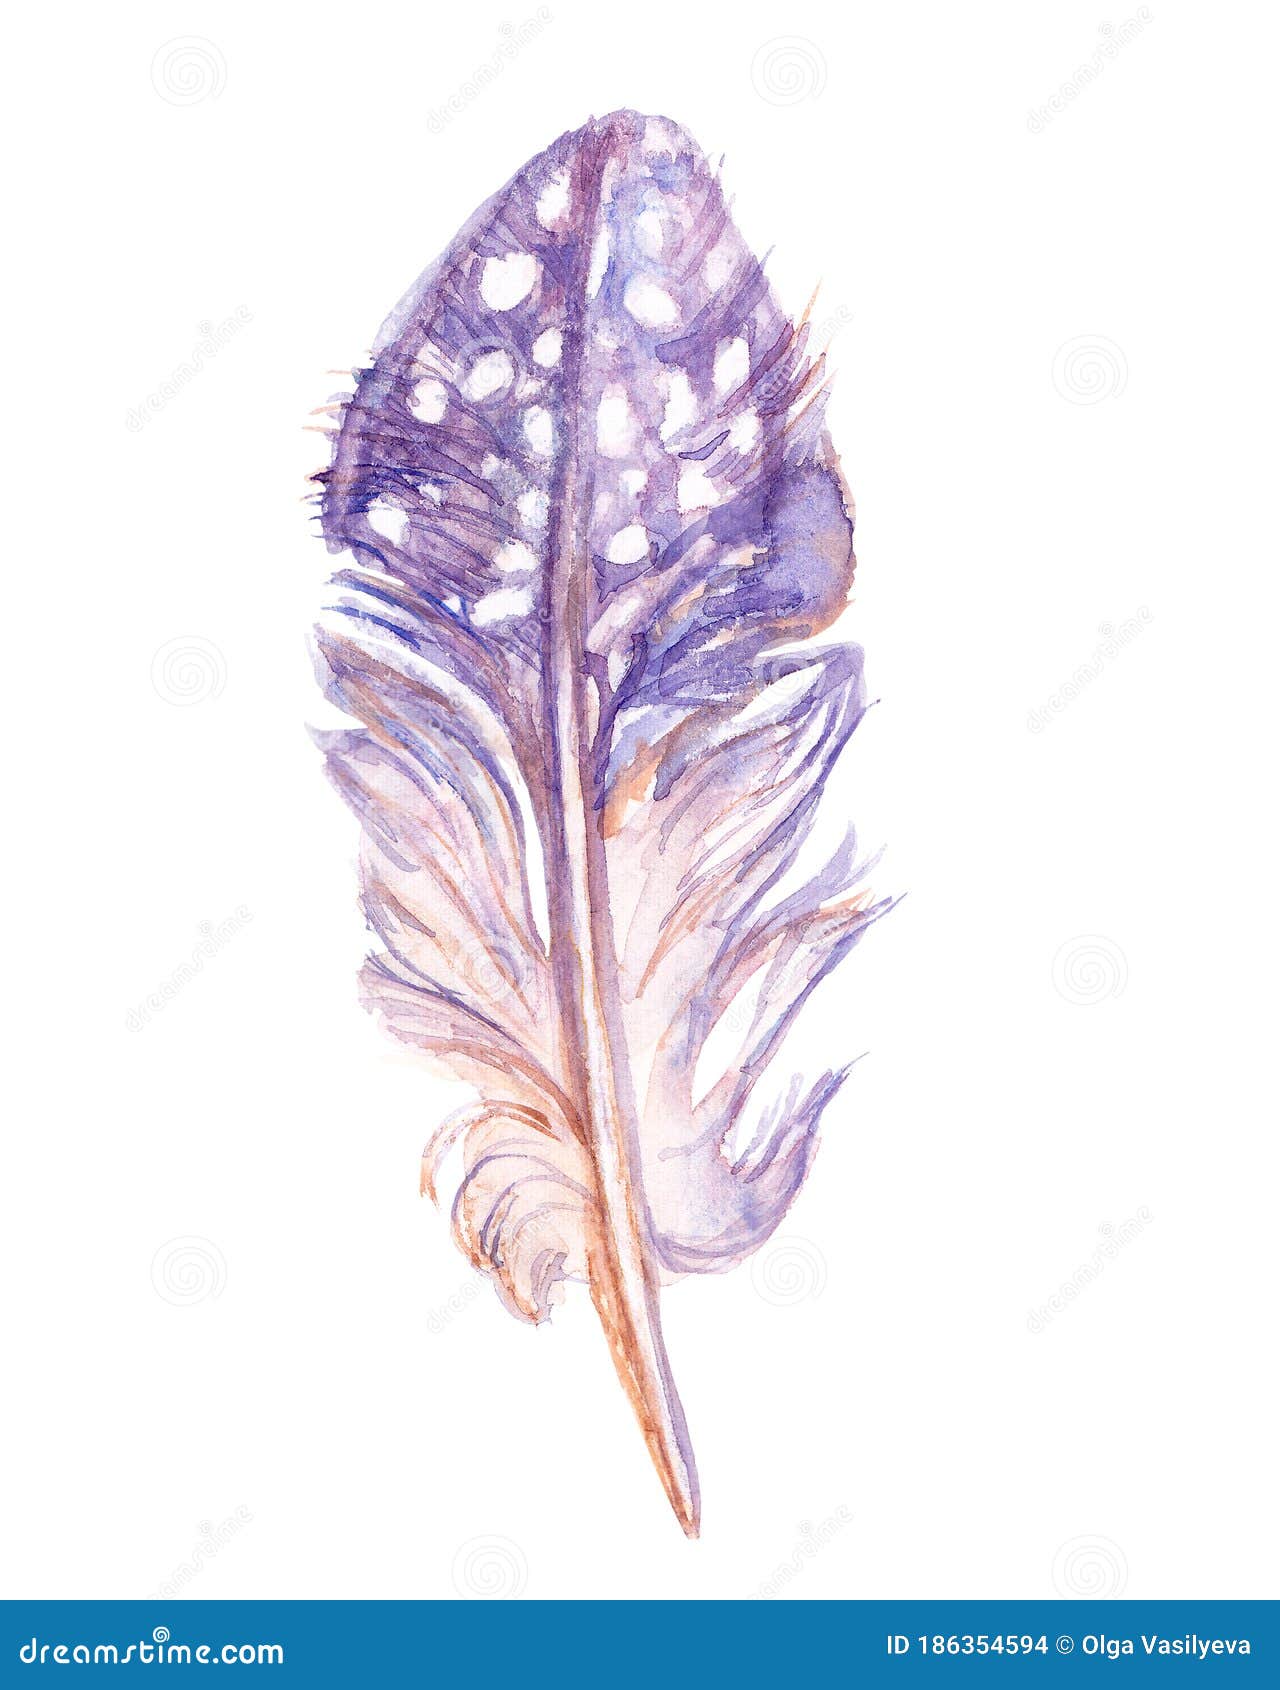 Fairy Quail Feather Isolated on the White Background. Handdrawn Watercolor  Work Stock Illustration - Illustration of draw, magic: 186354594